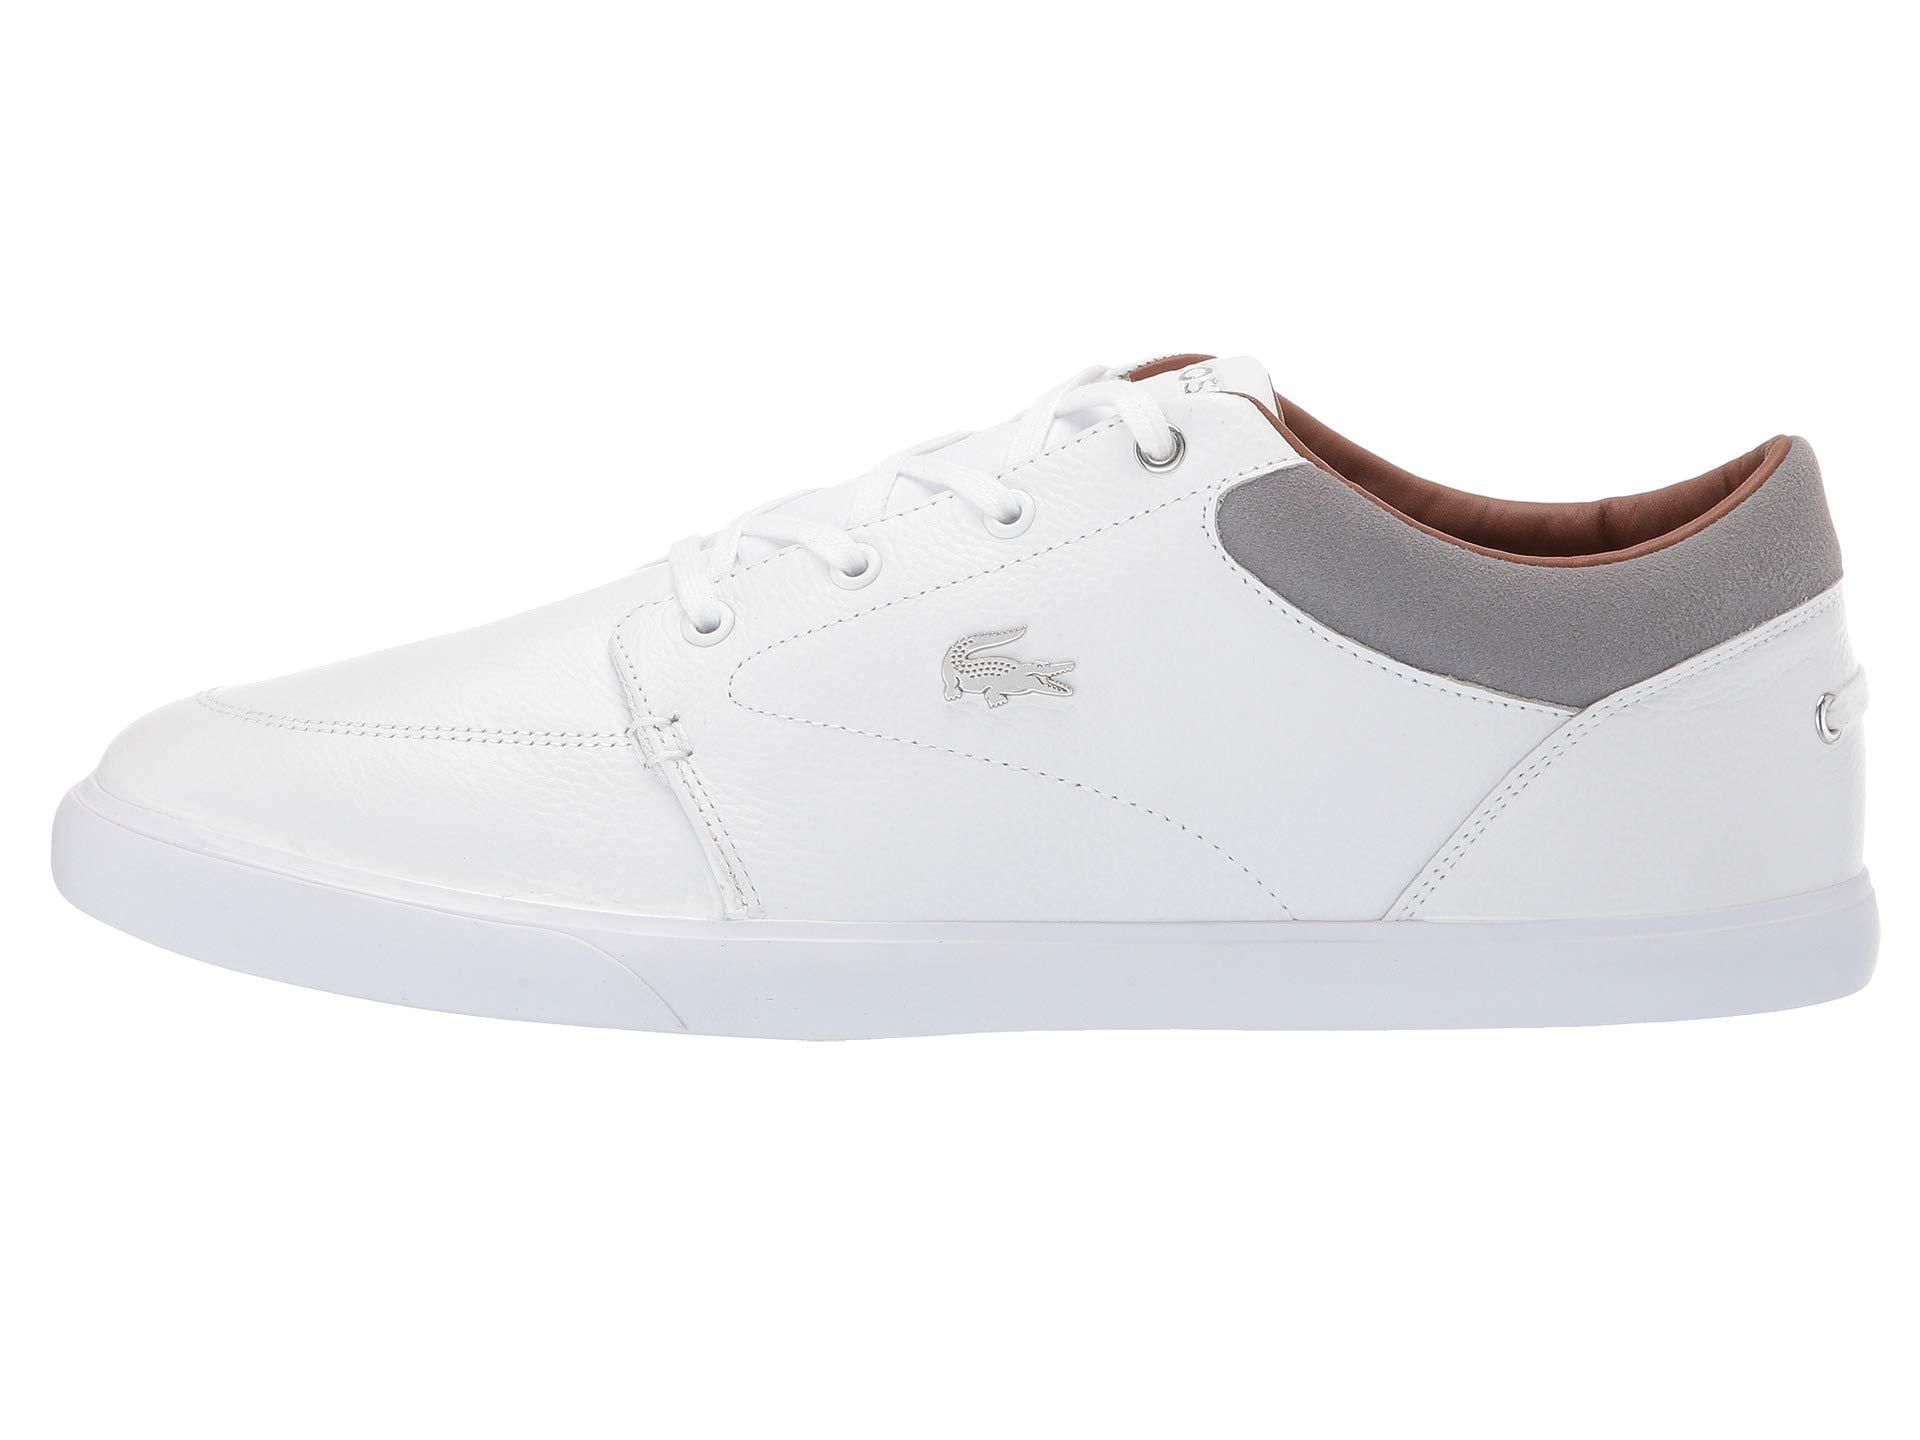 Lacoste Leather Bayliss 118 1 U (white/grey) Men's Shoes for Men - Lyst